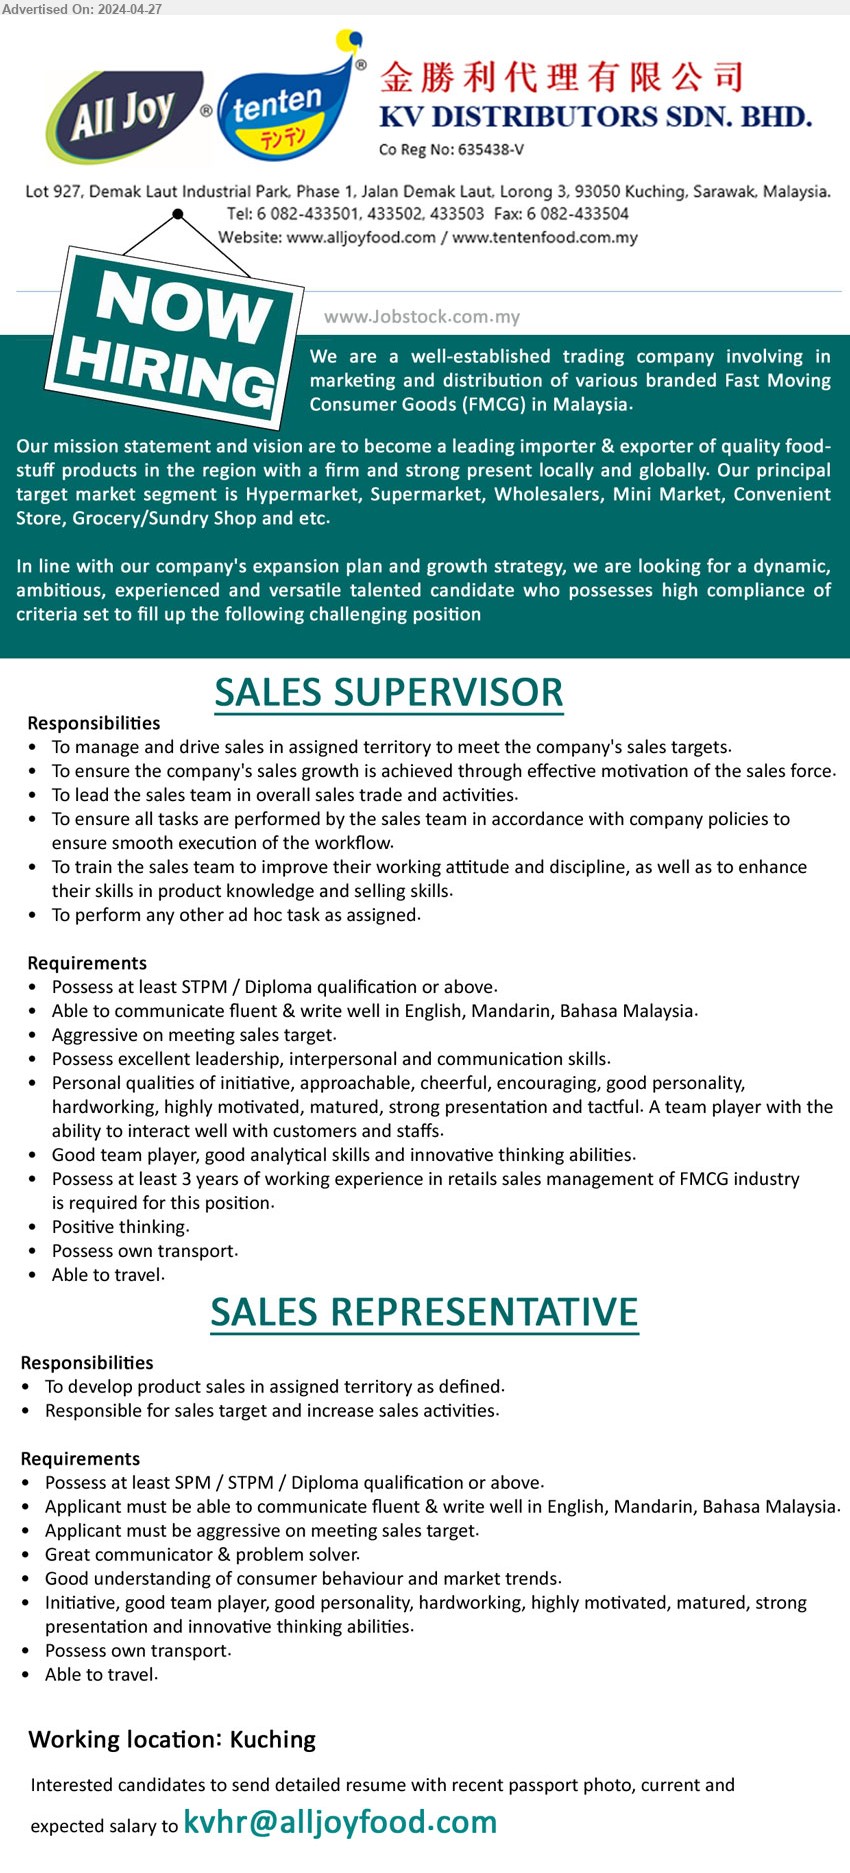 KV DISTRIBUTORS SDN BHD - 1. SALES SUPERVISOR (Kuching), STPM / Diploma, Possess at least 3 years of working experience in retails sales management of FMCG industry,...
2. SALES REPRESENTATIVE (Kuching), SPM / STPM / Diploma, Good understanding of consumer behaviour and market trends.,...
Email resume to ...